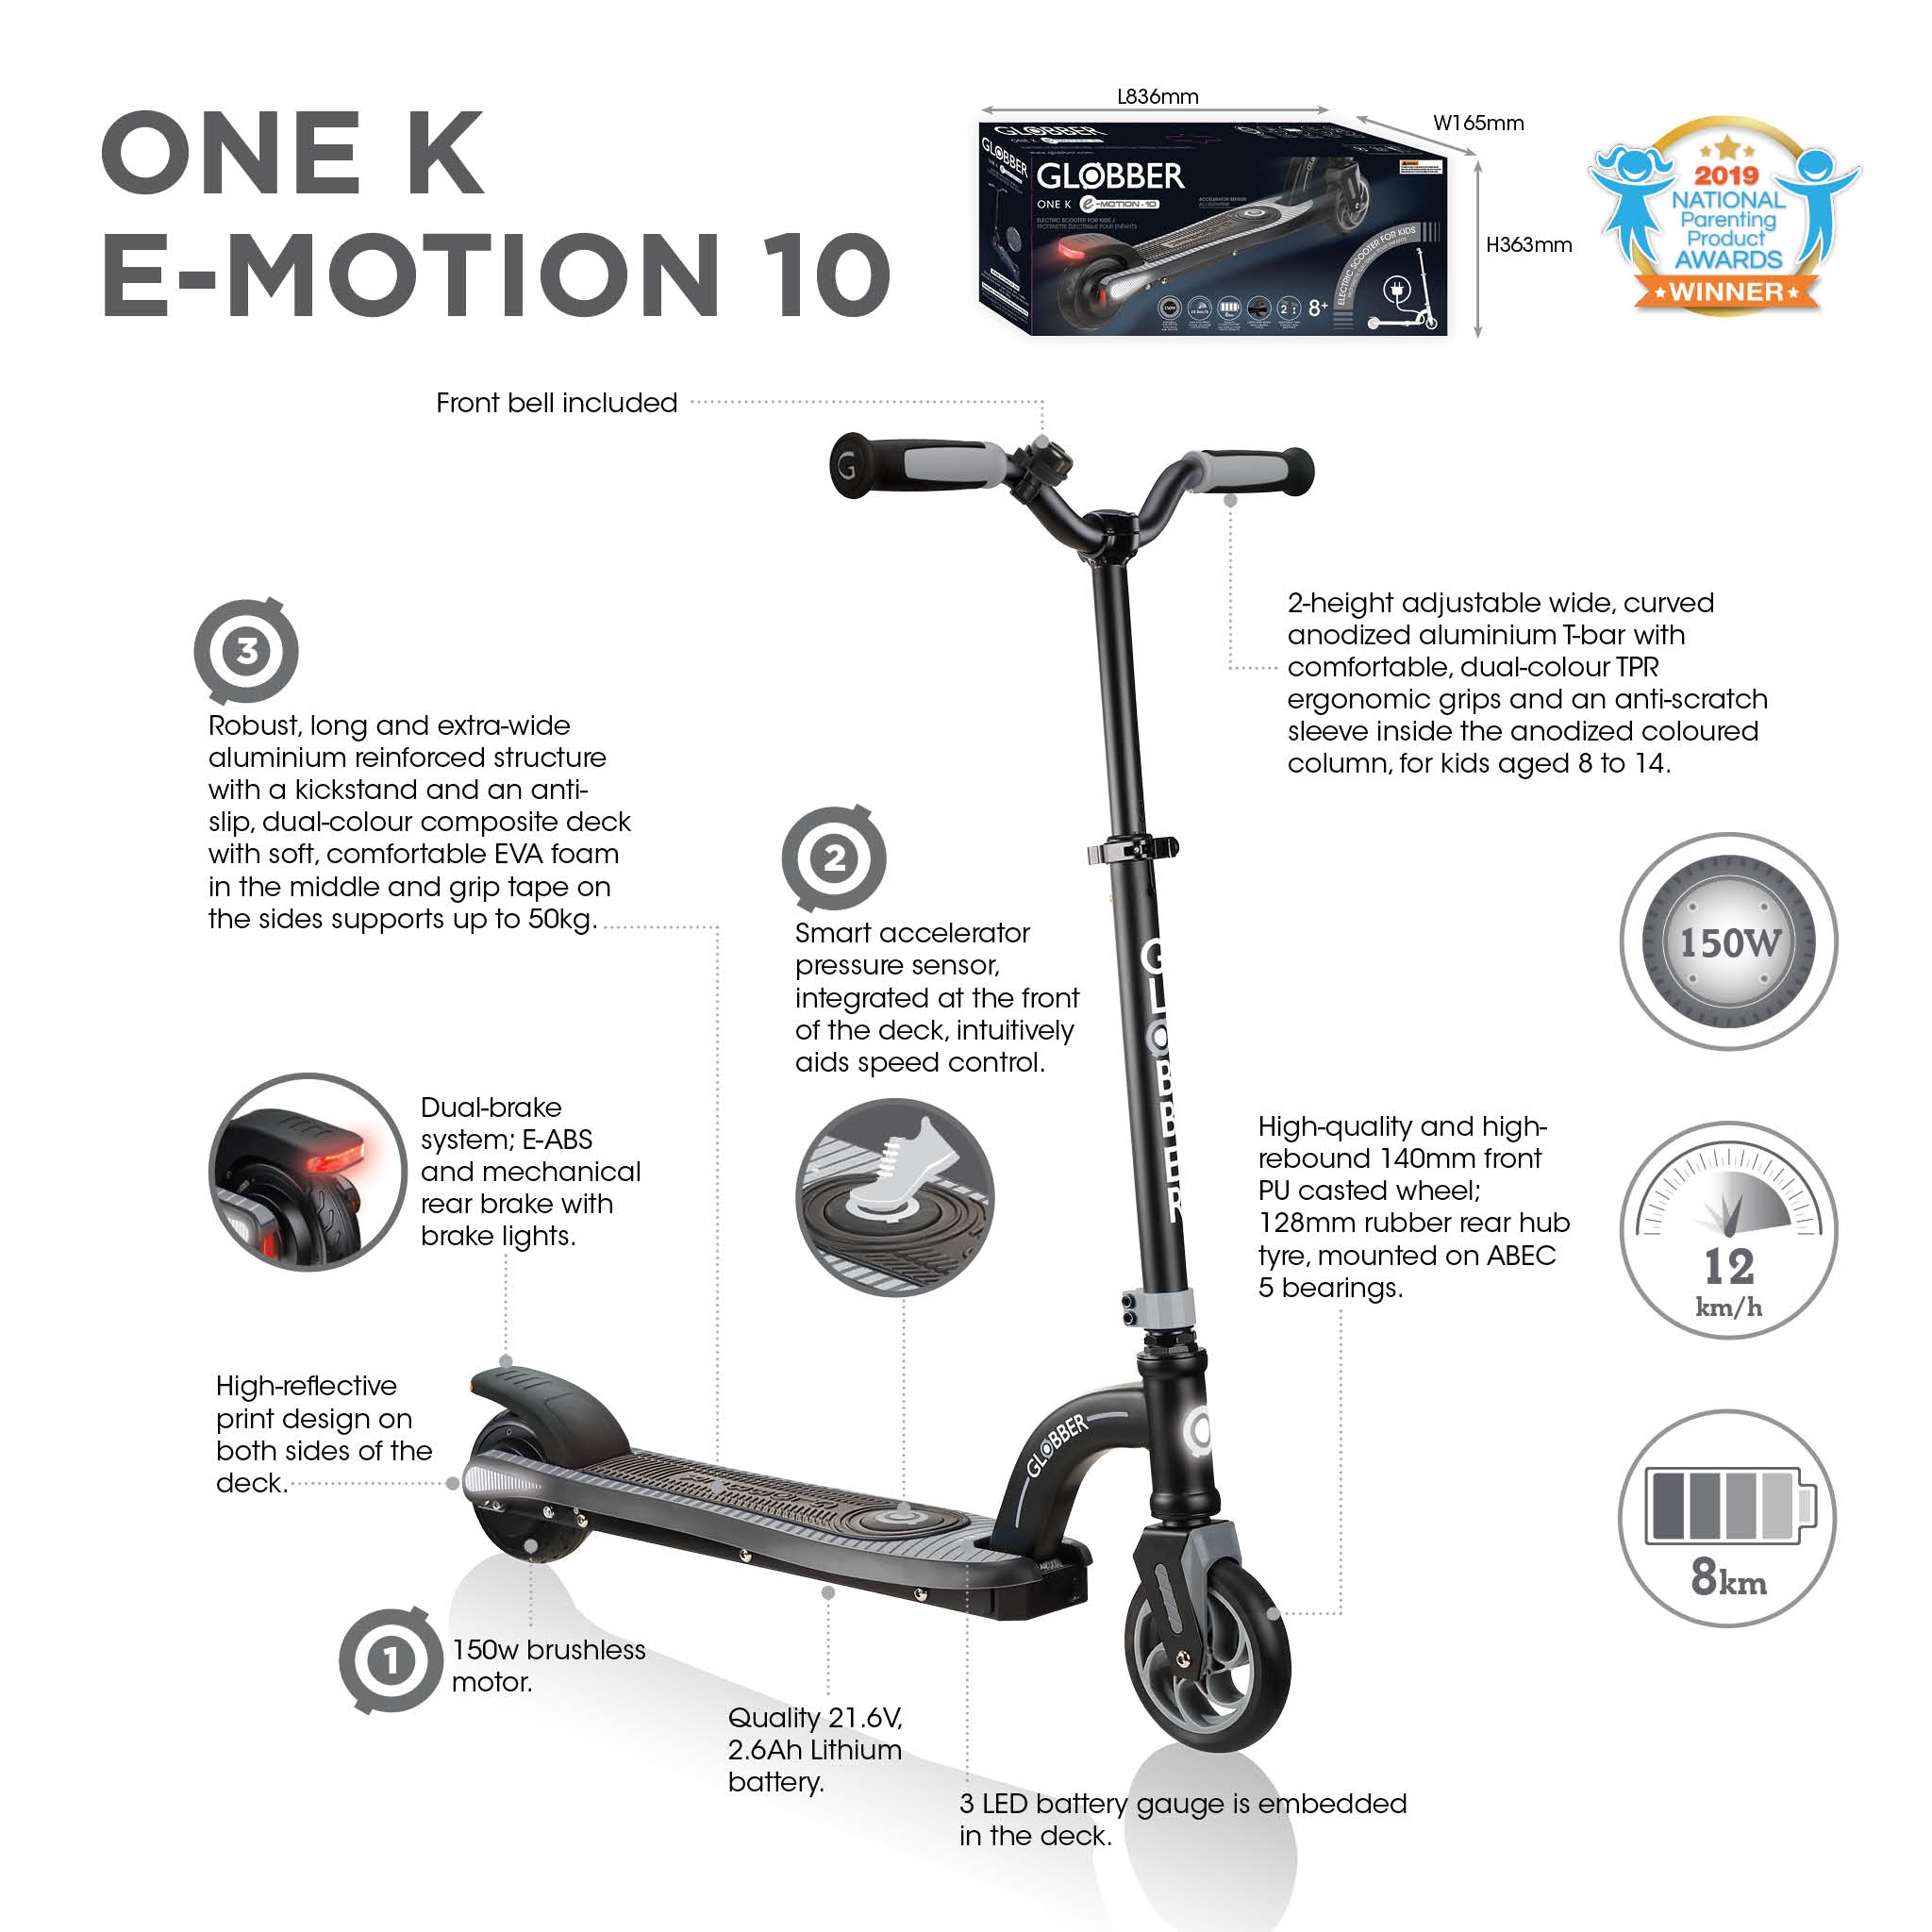 Globber-ONE-K-E-MOTION-10-electric-scooter-for-kids 2